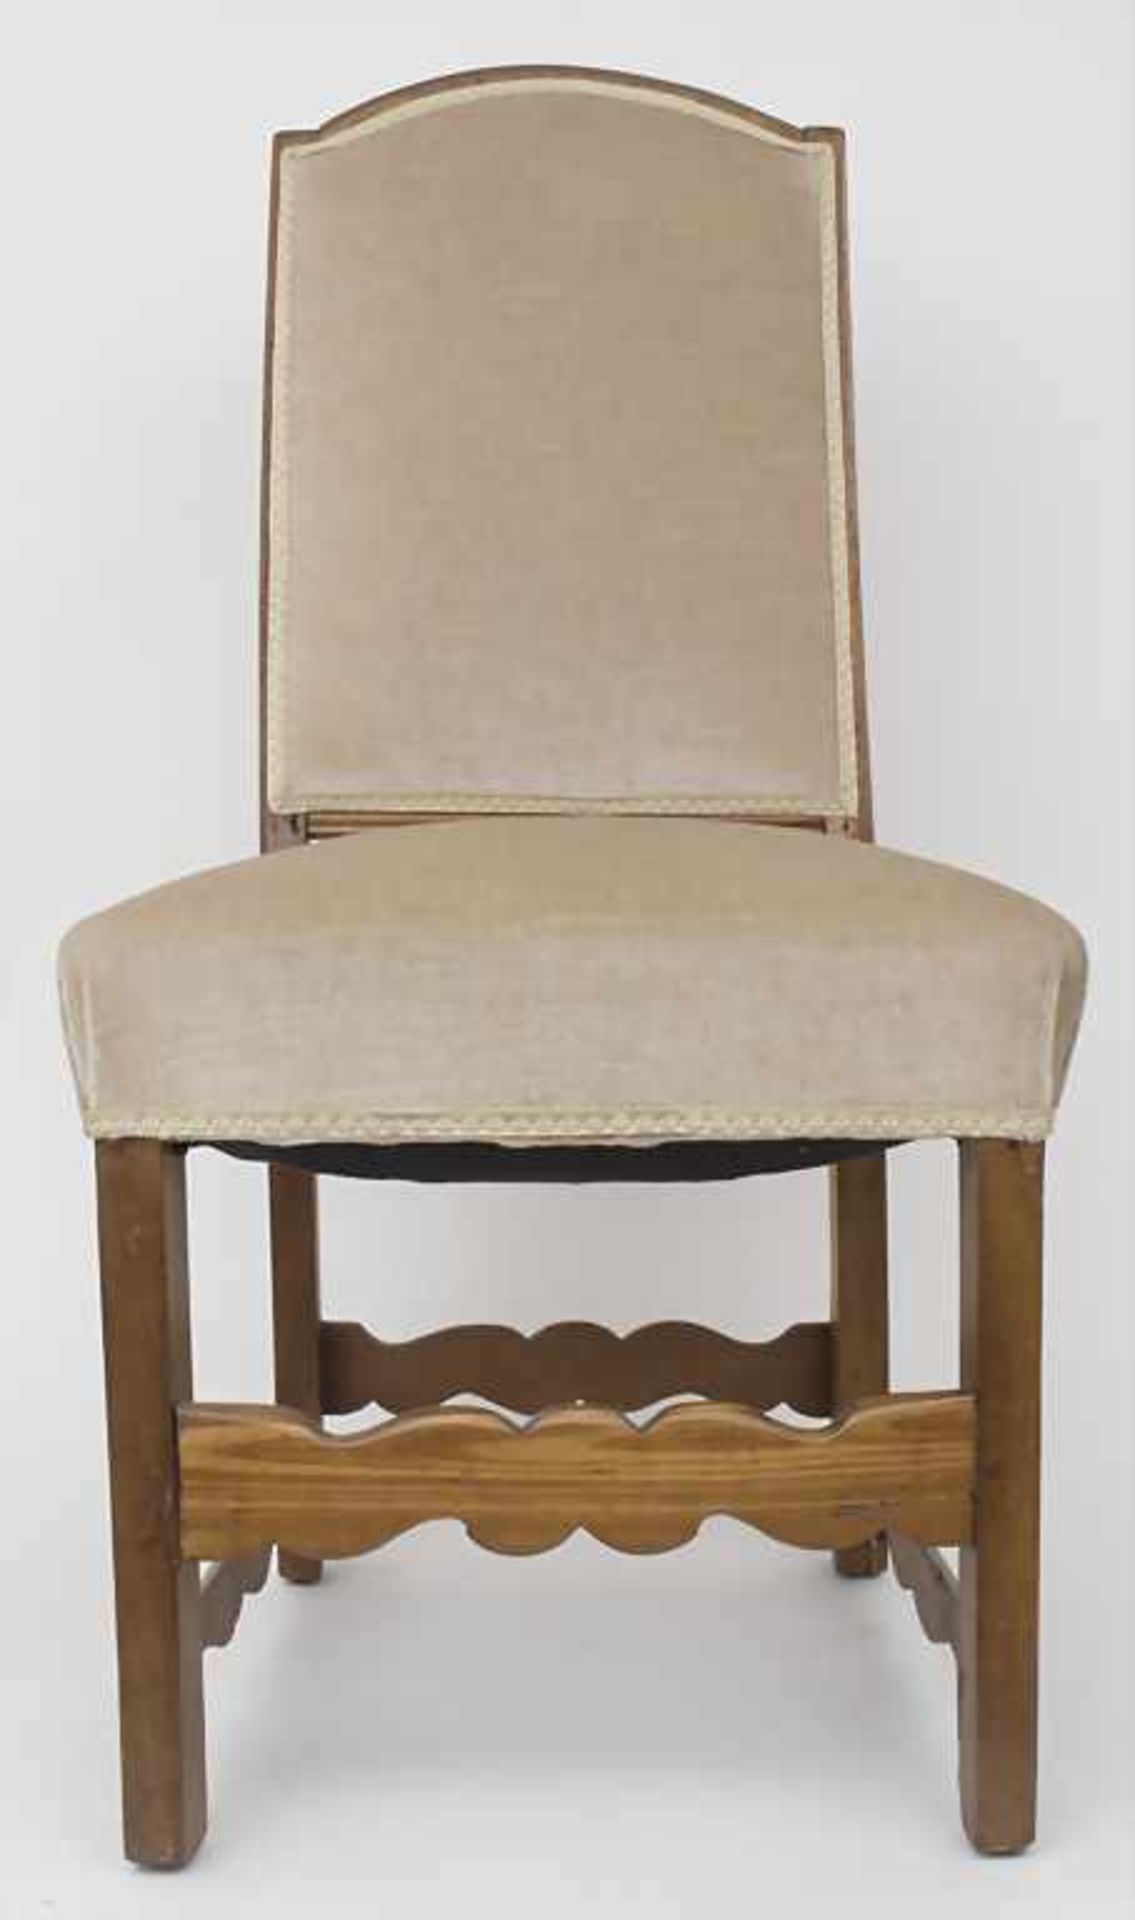 Stuhl mit Veloursbezug / A chair with velour coverMaterial: Holz, Sprungfederpolsterung, Maße: H.